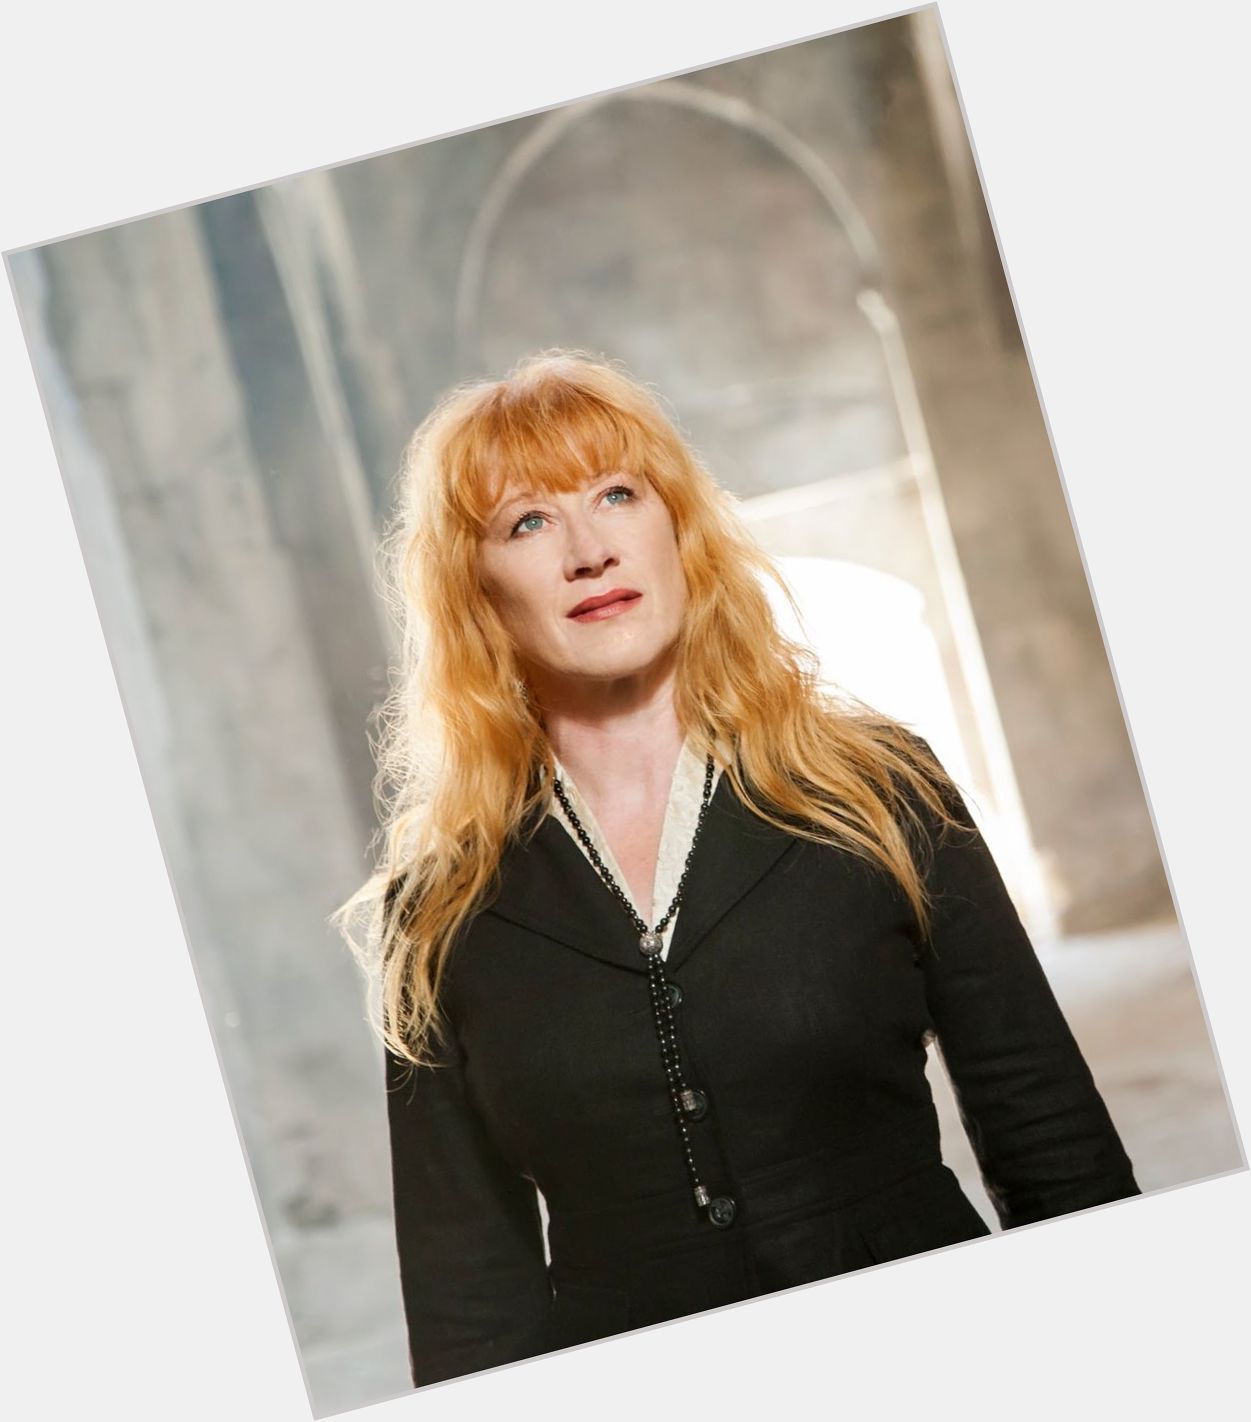 Happy Birthday Loreena Mckennitt!
Canadian Celtic singer and musician turns 66 yrs young today.   